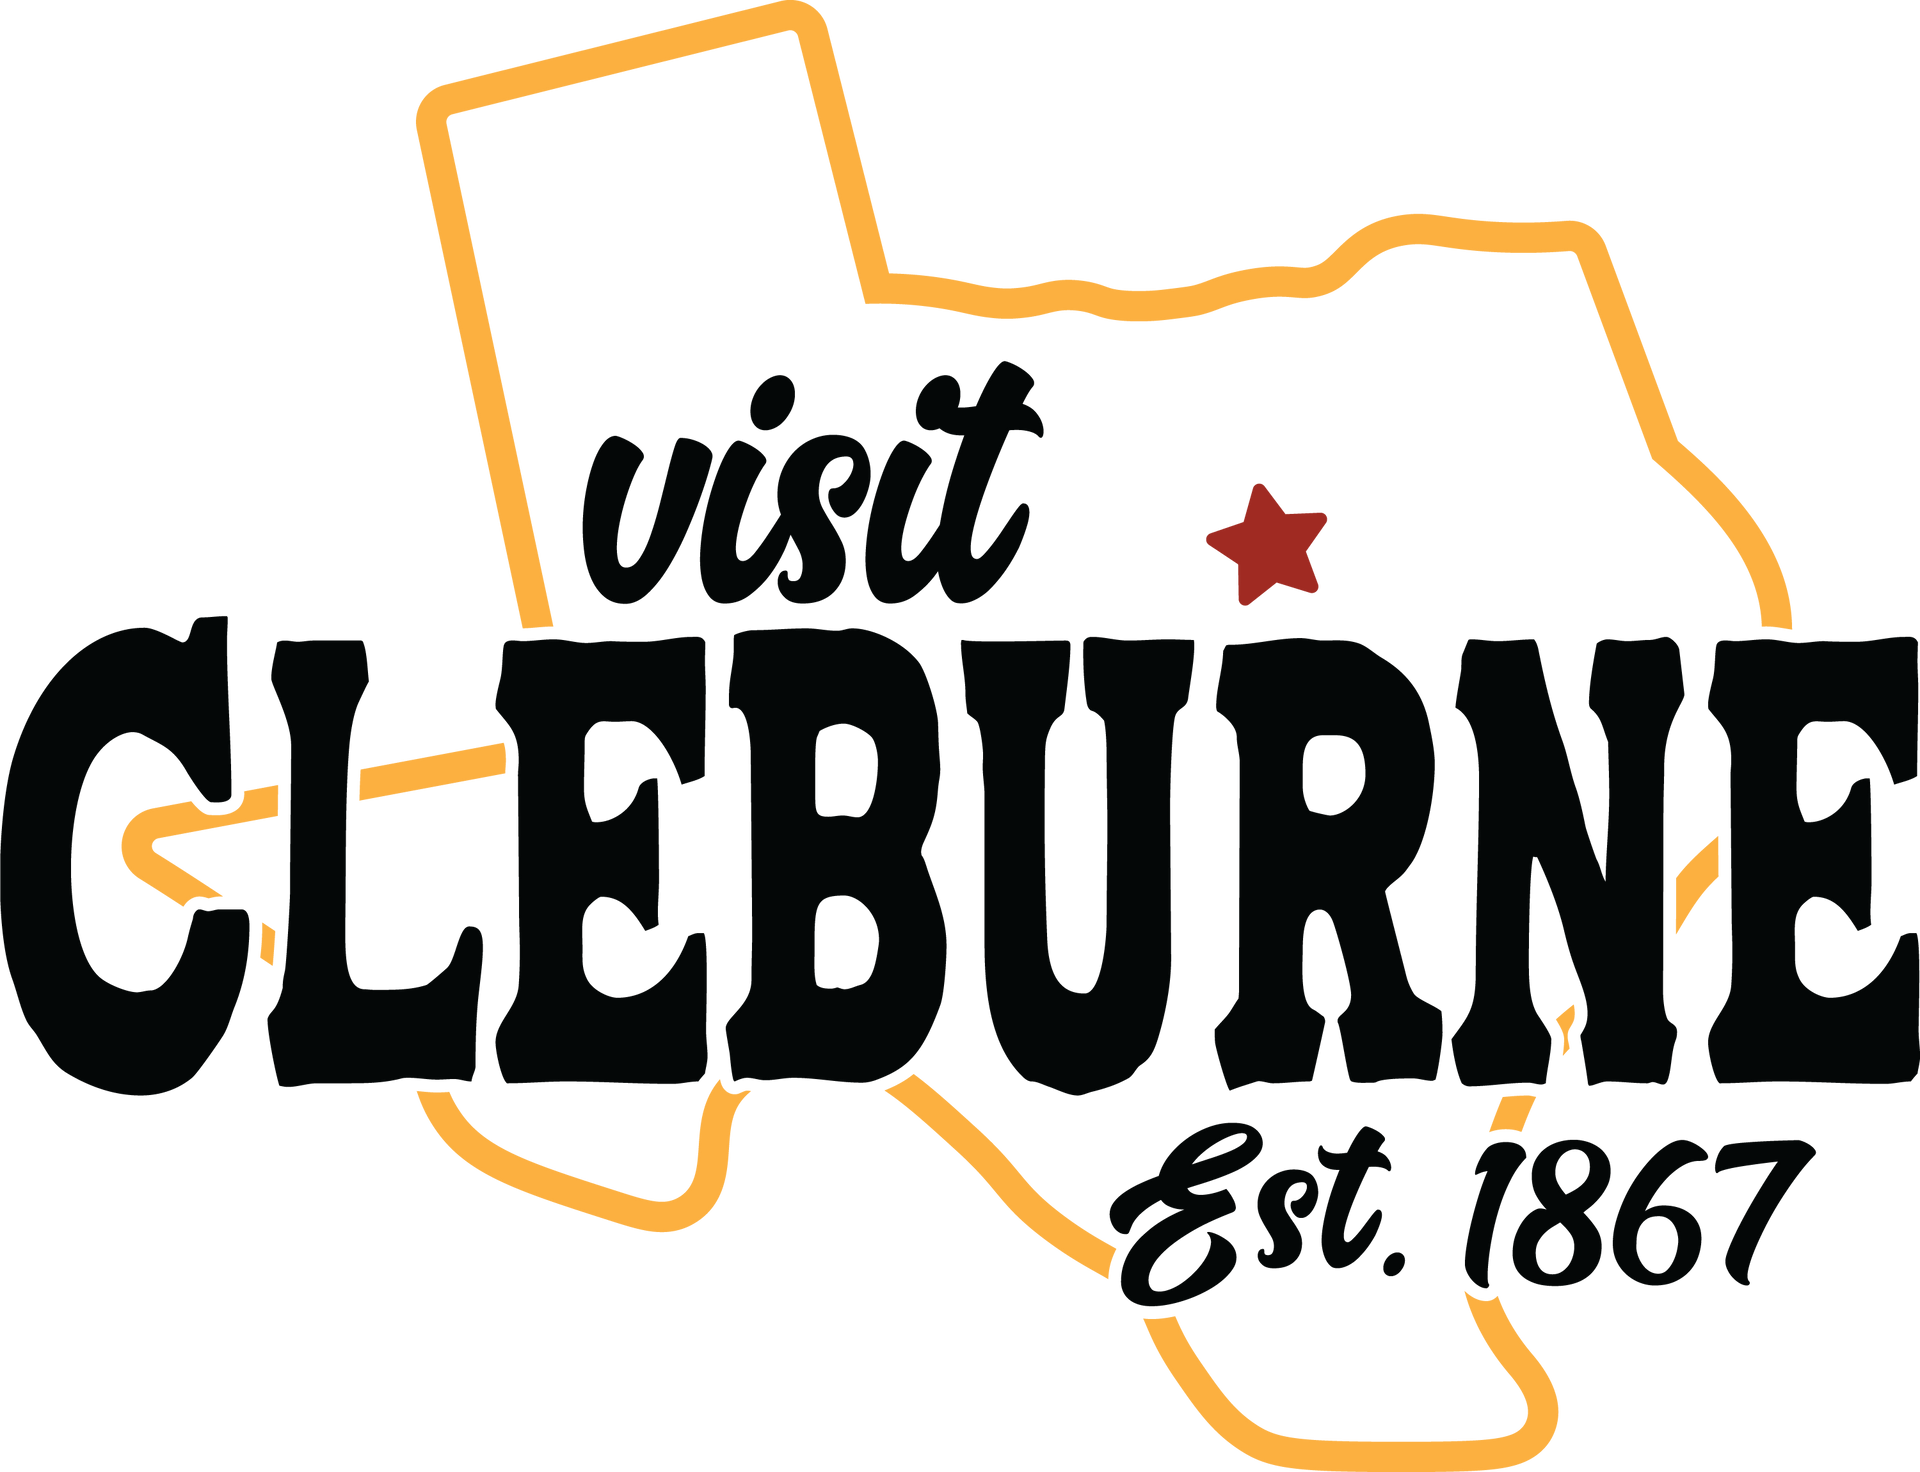 The logo for visit cleburne is a map of texas.